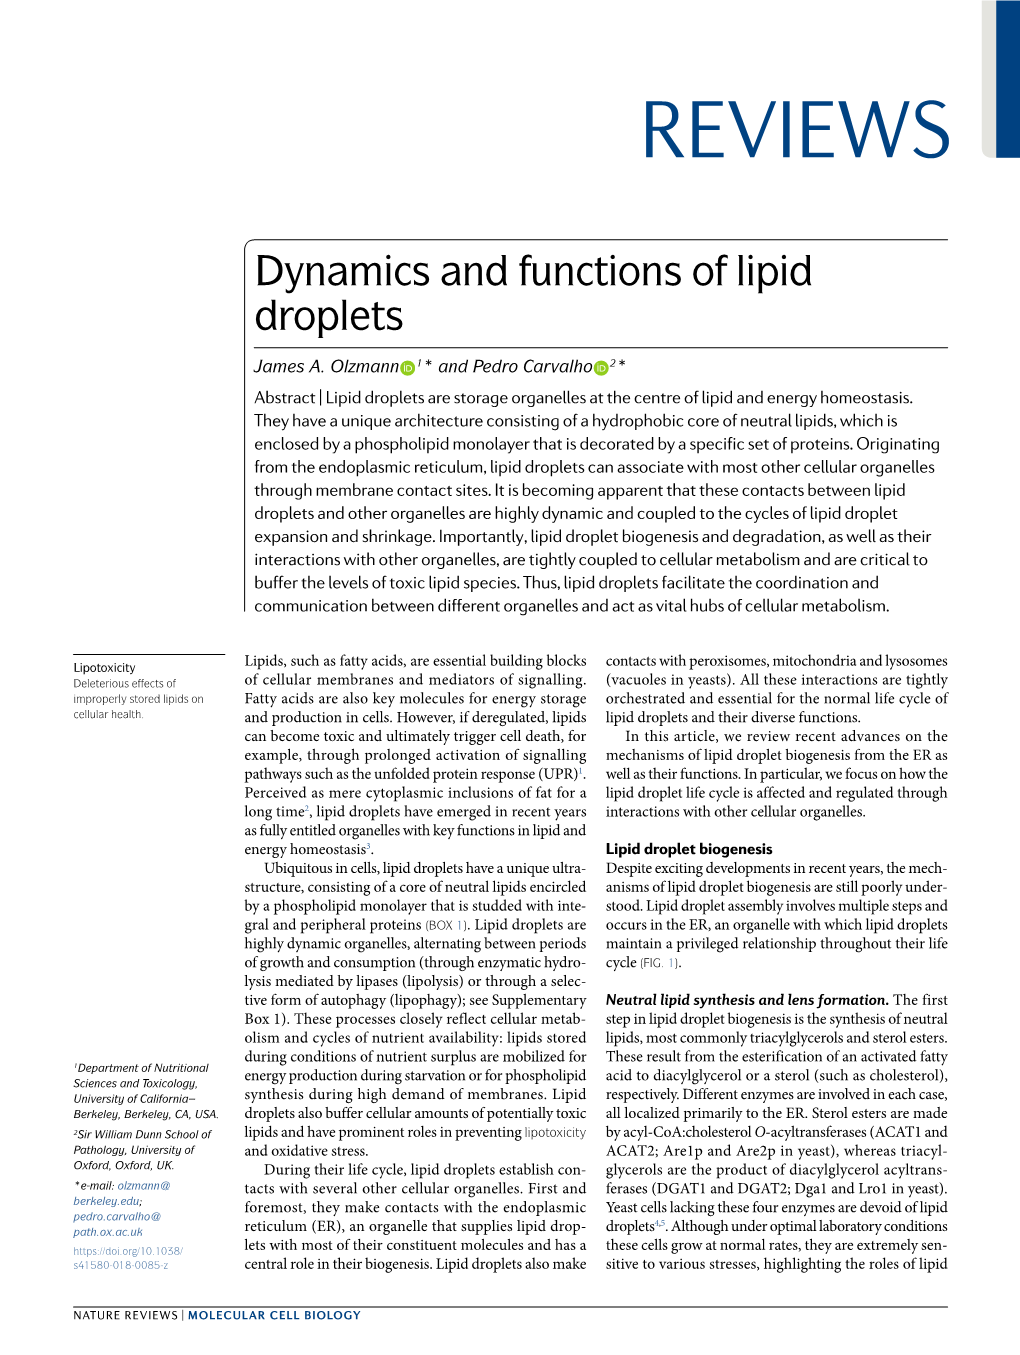 Dynamics and Functions of Lipid Droplets